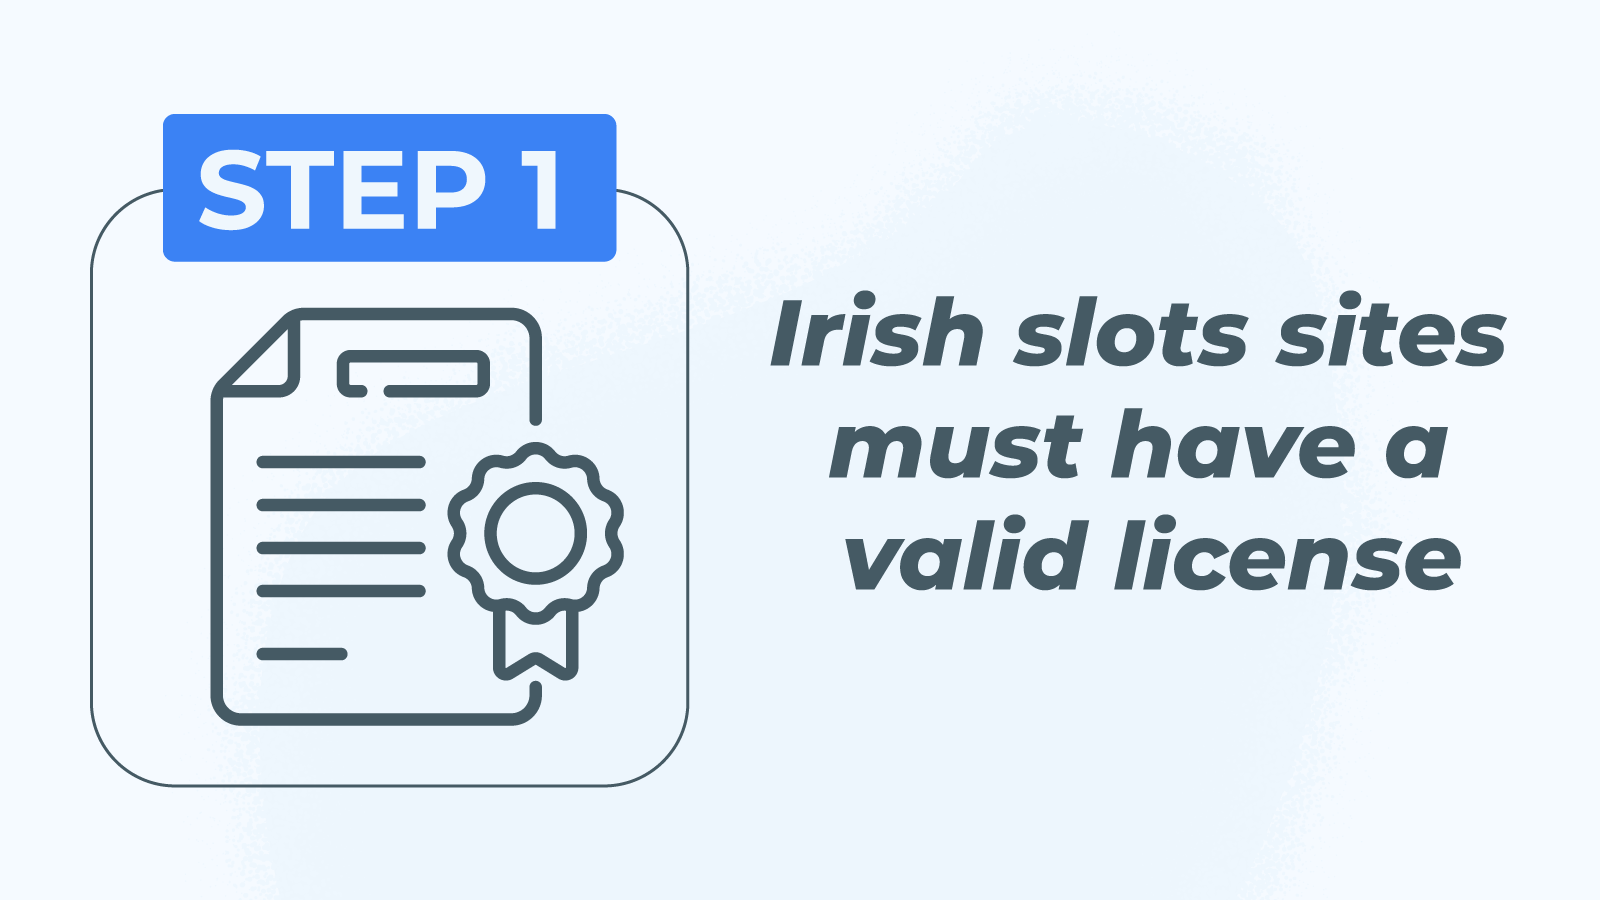 Irish slots sites must have a valid license